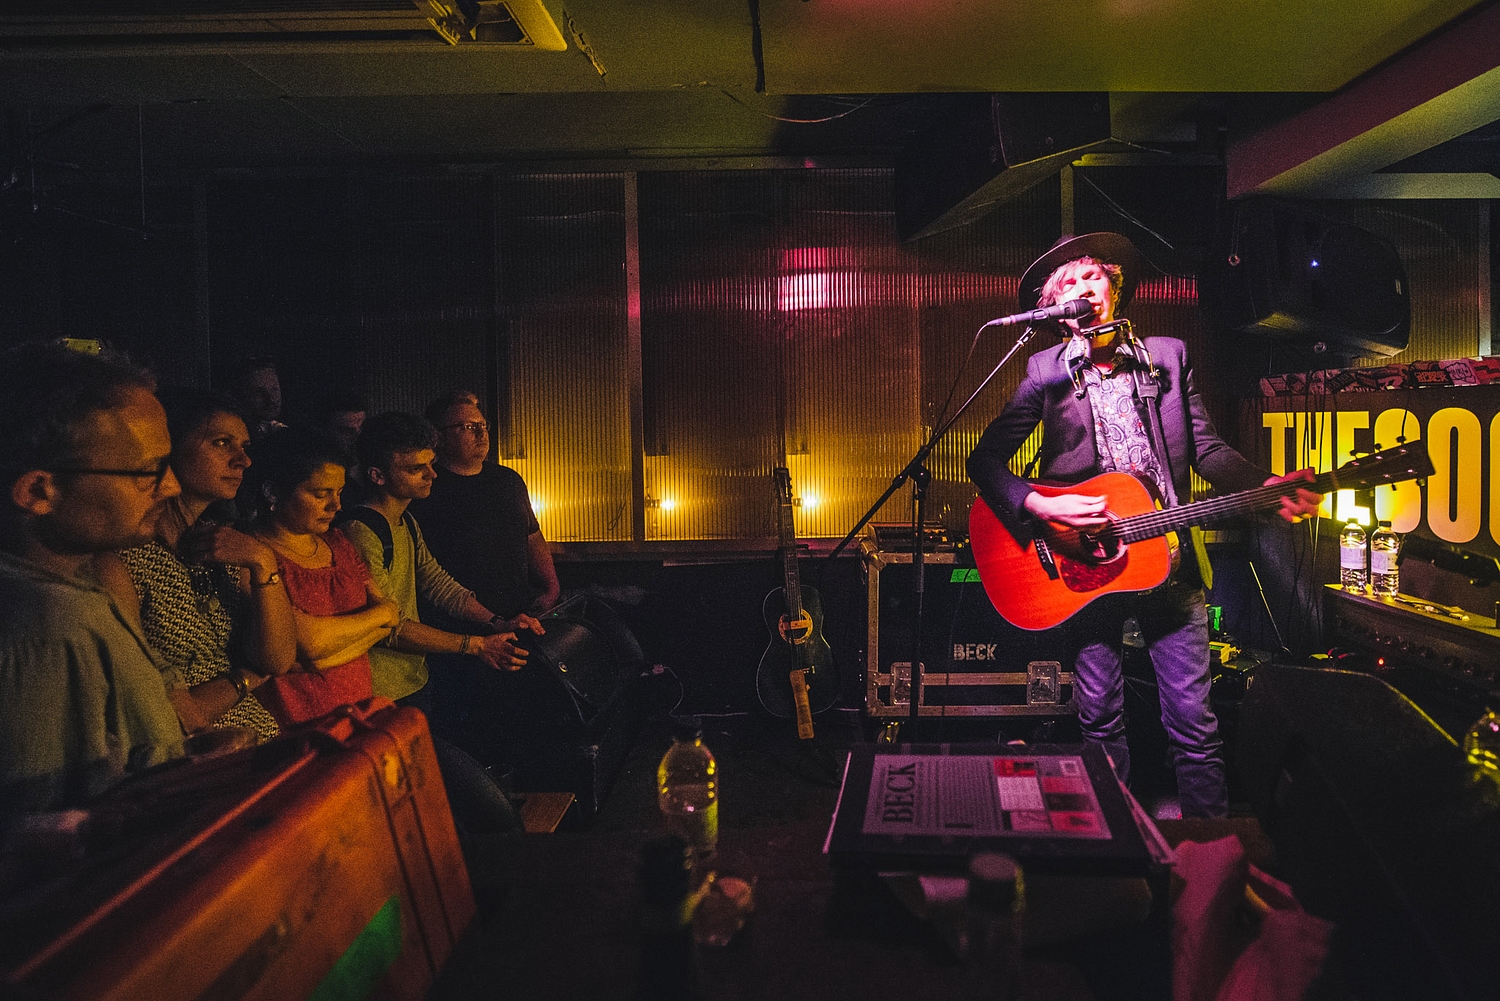 Beck surprises London with intimate solo gig